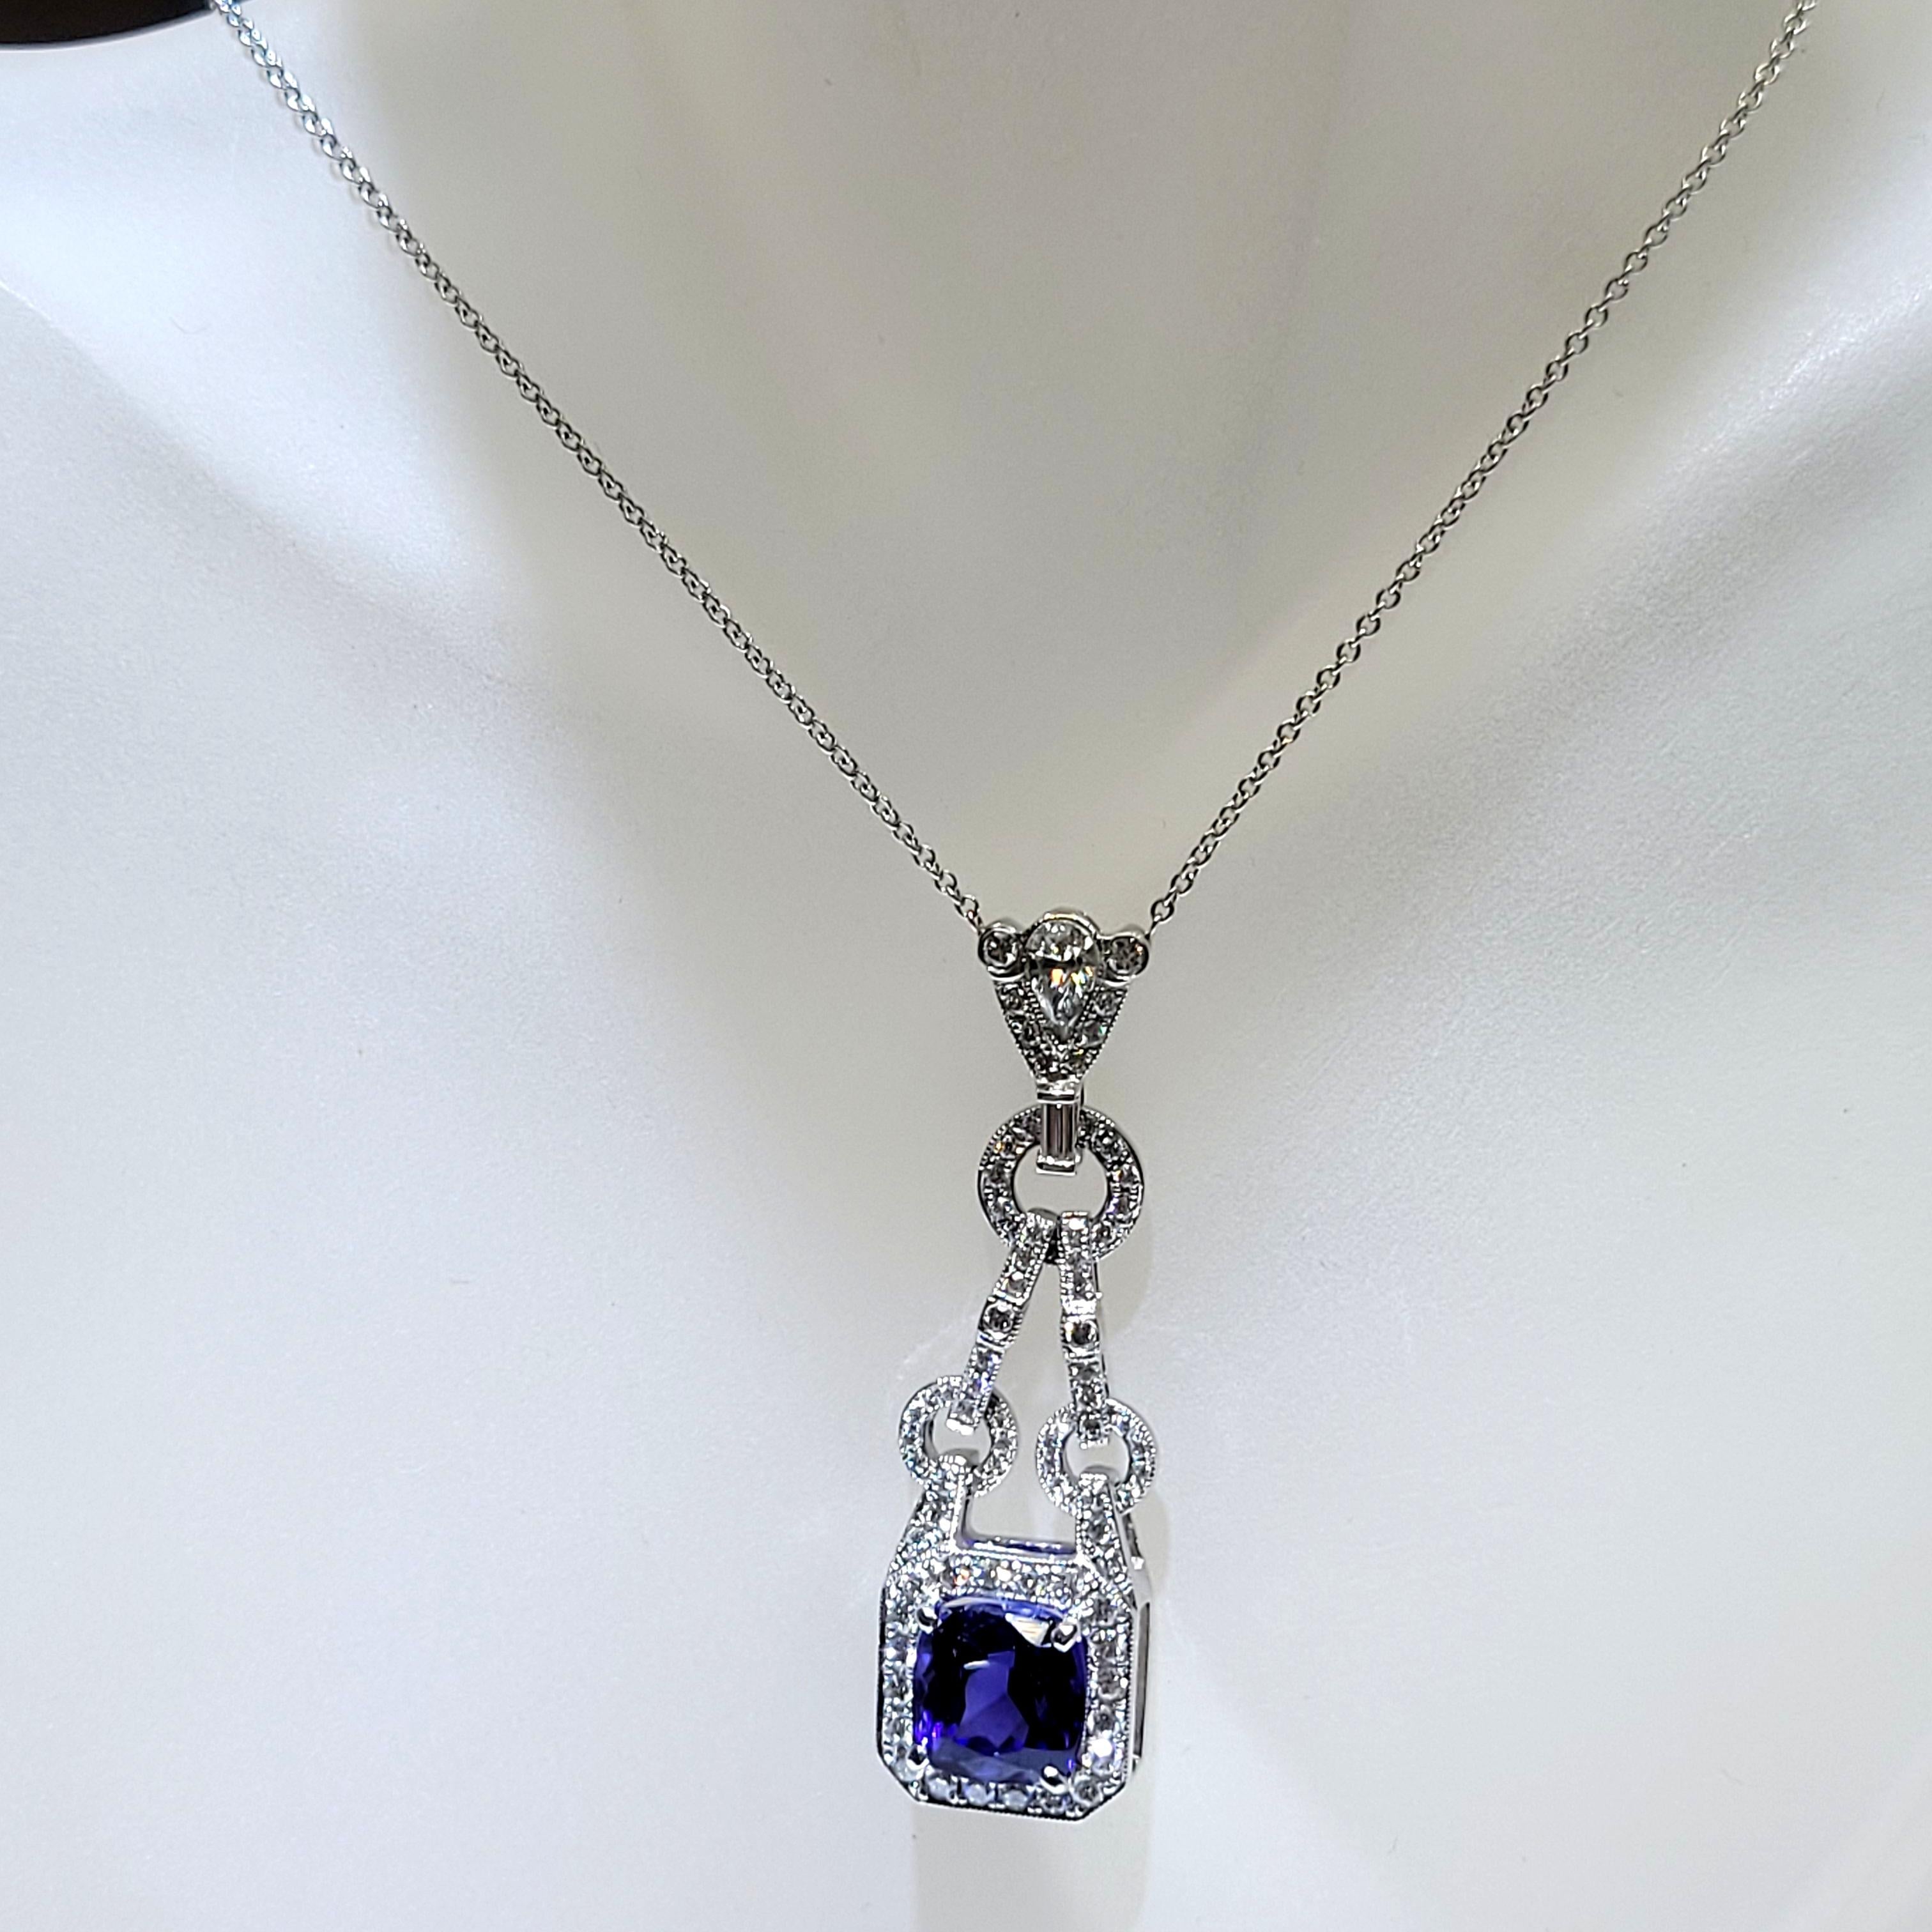 Cushion Cut 5.62 Carat Cushion Shape Tanzanite Necklace with 1.40 Carat Diamonds on the Side For Sale